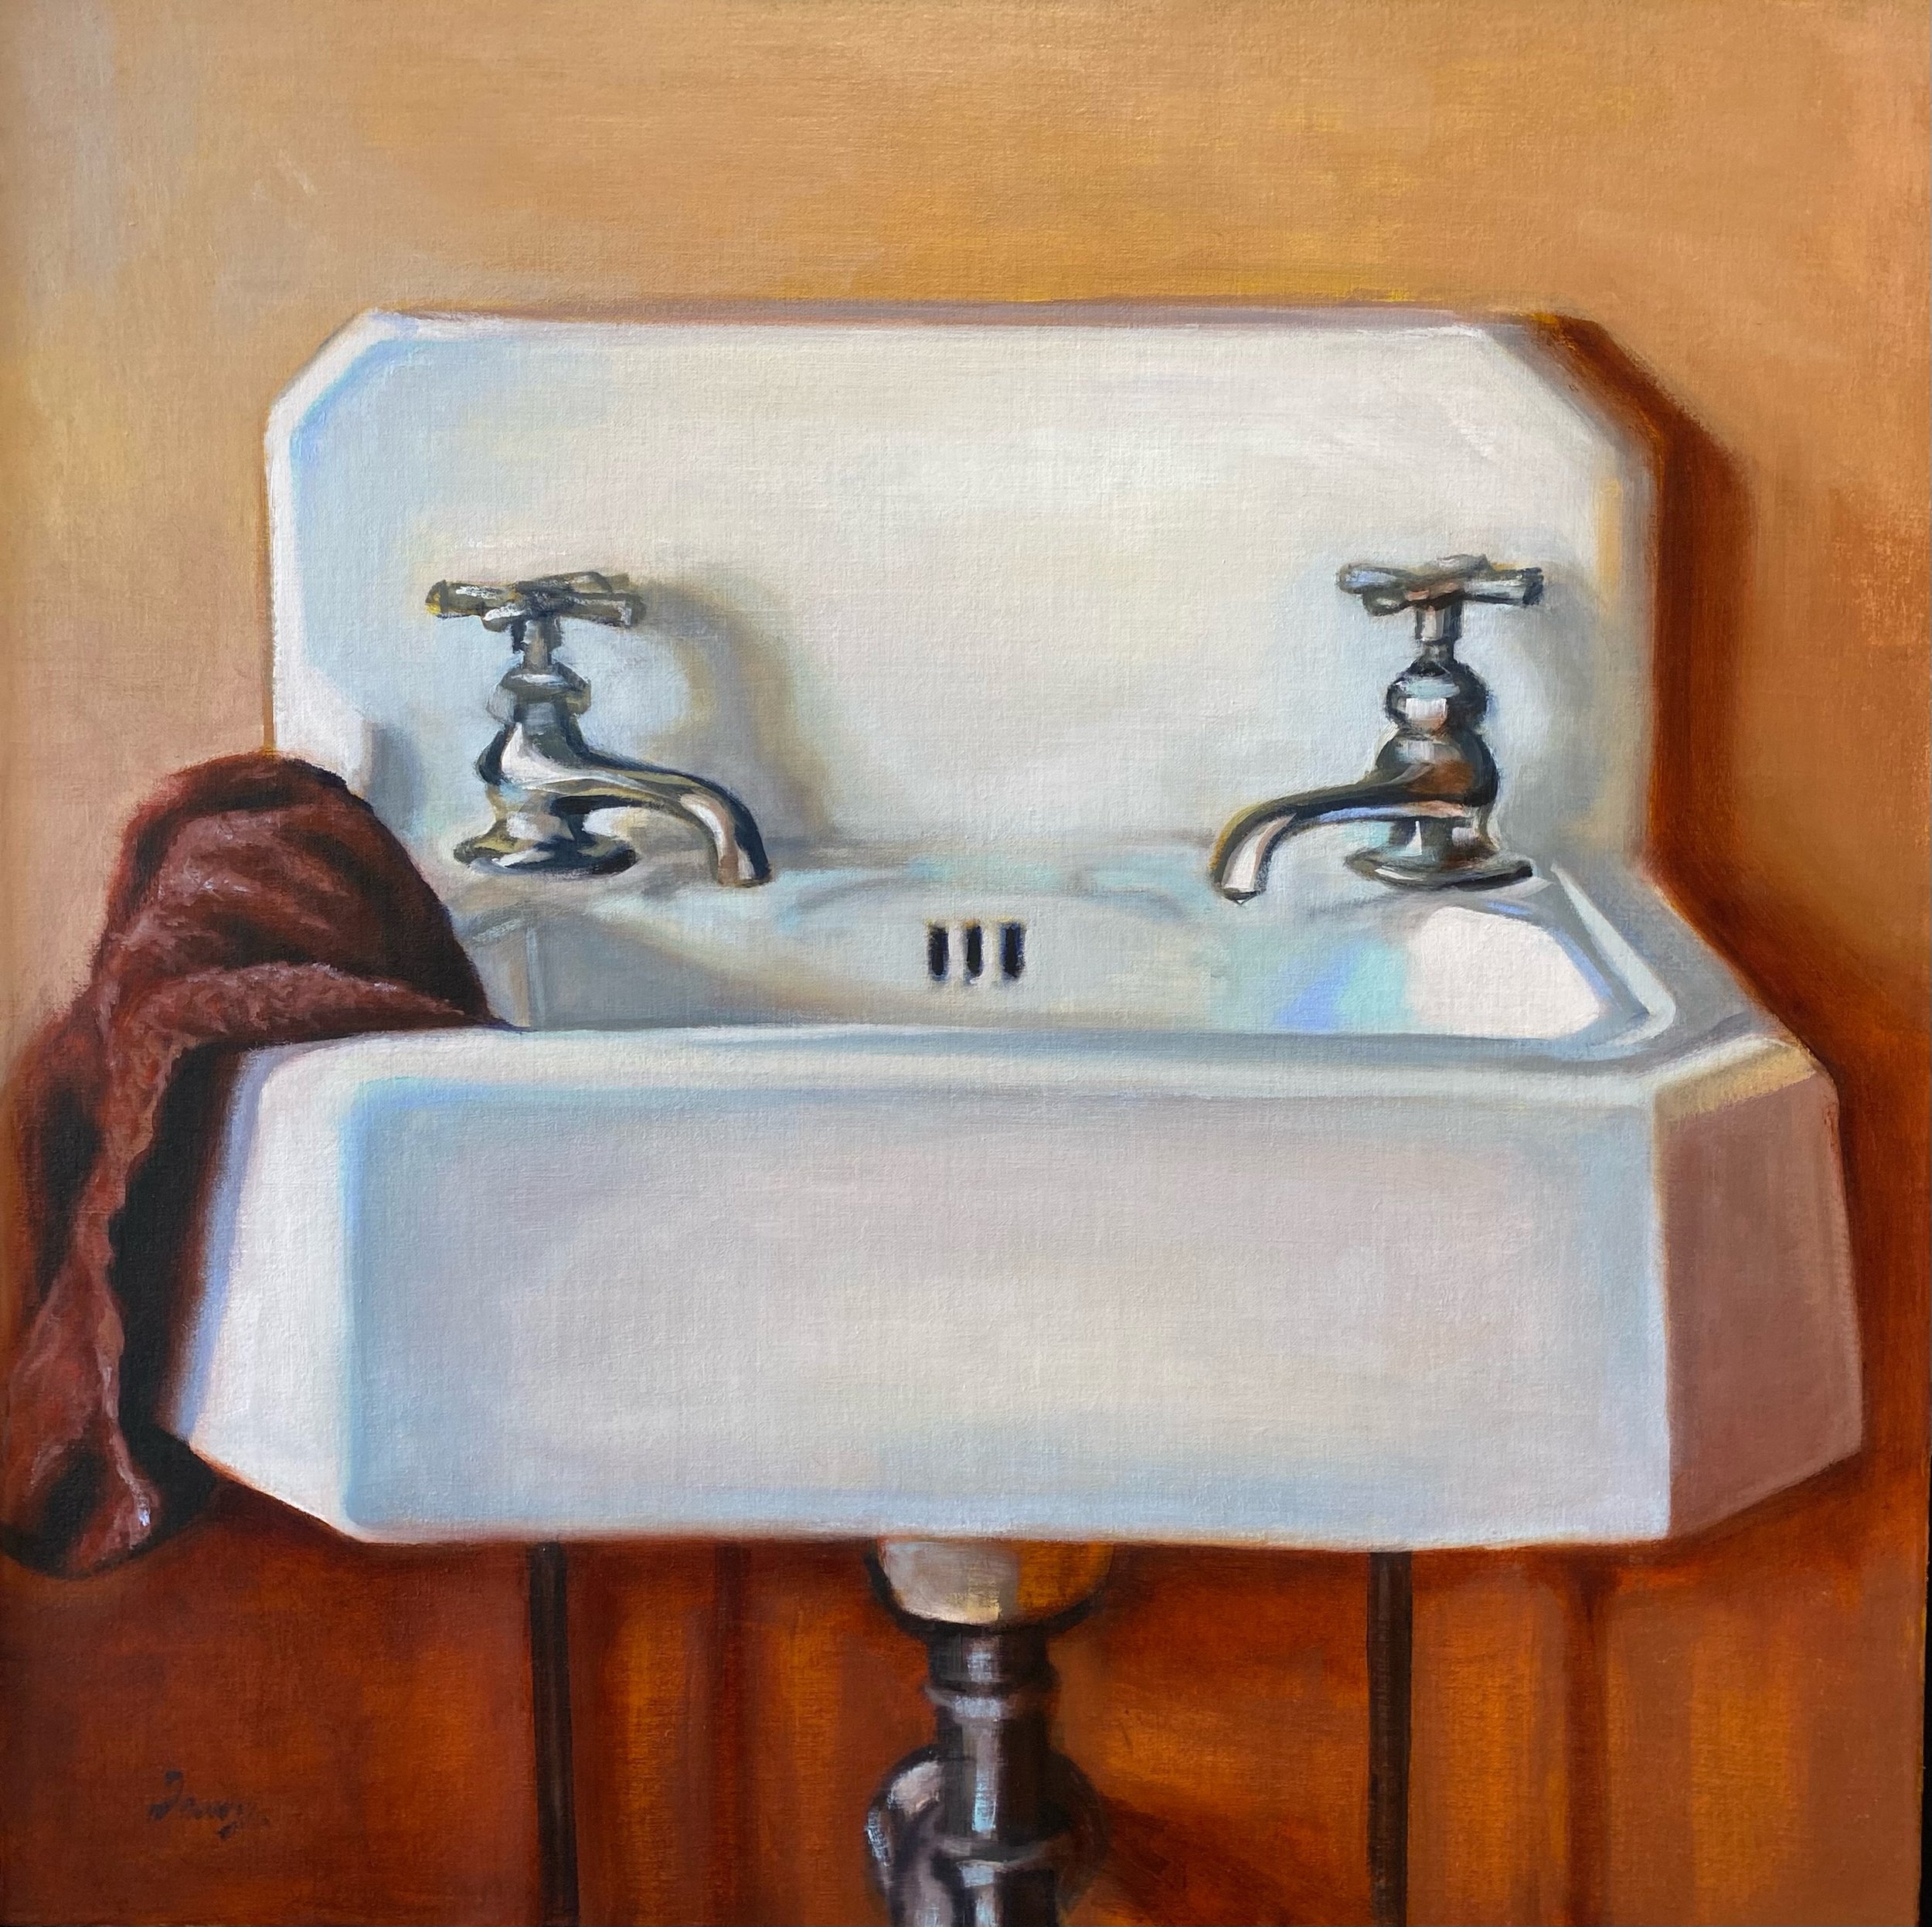 Sink I Salty Towers, 2022 - 24" x 24", Oil on Linen, $1500